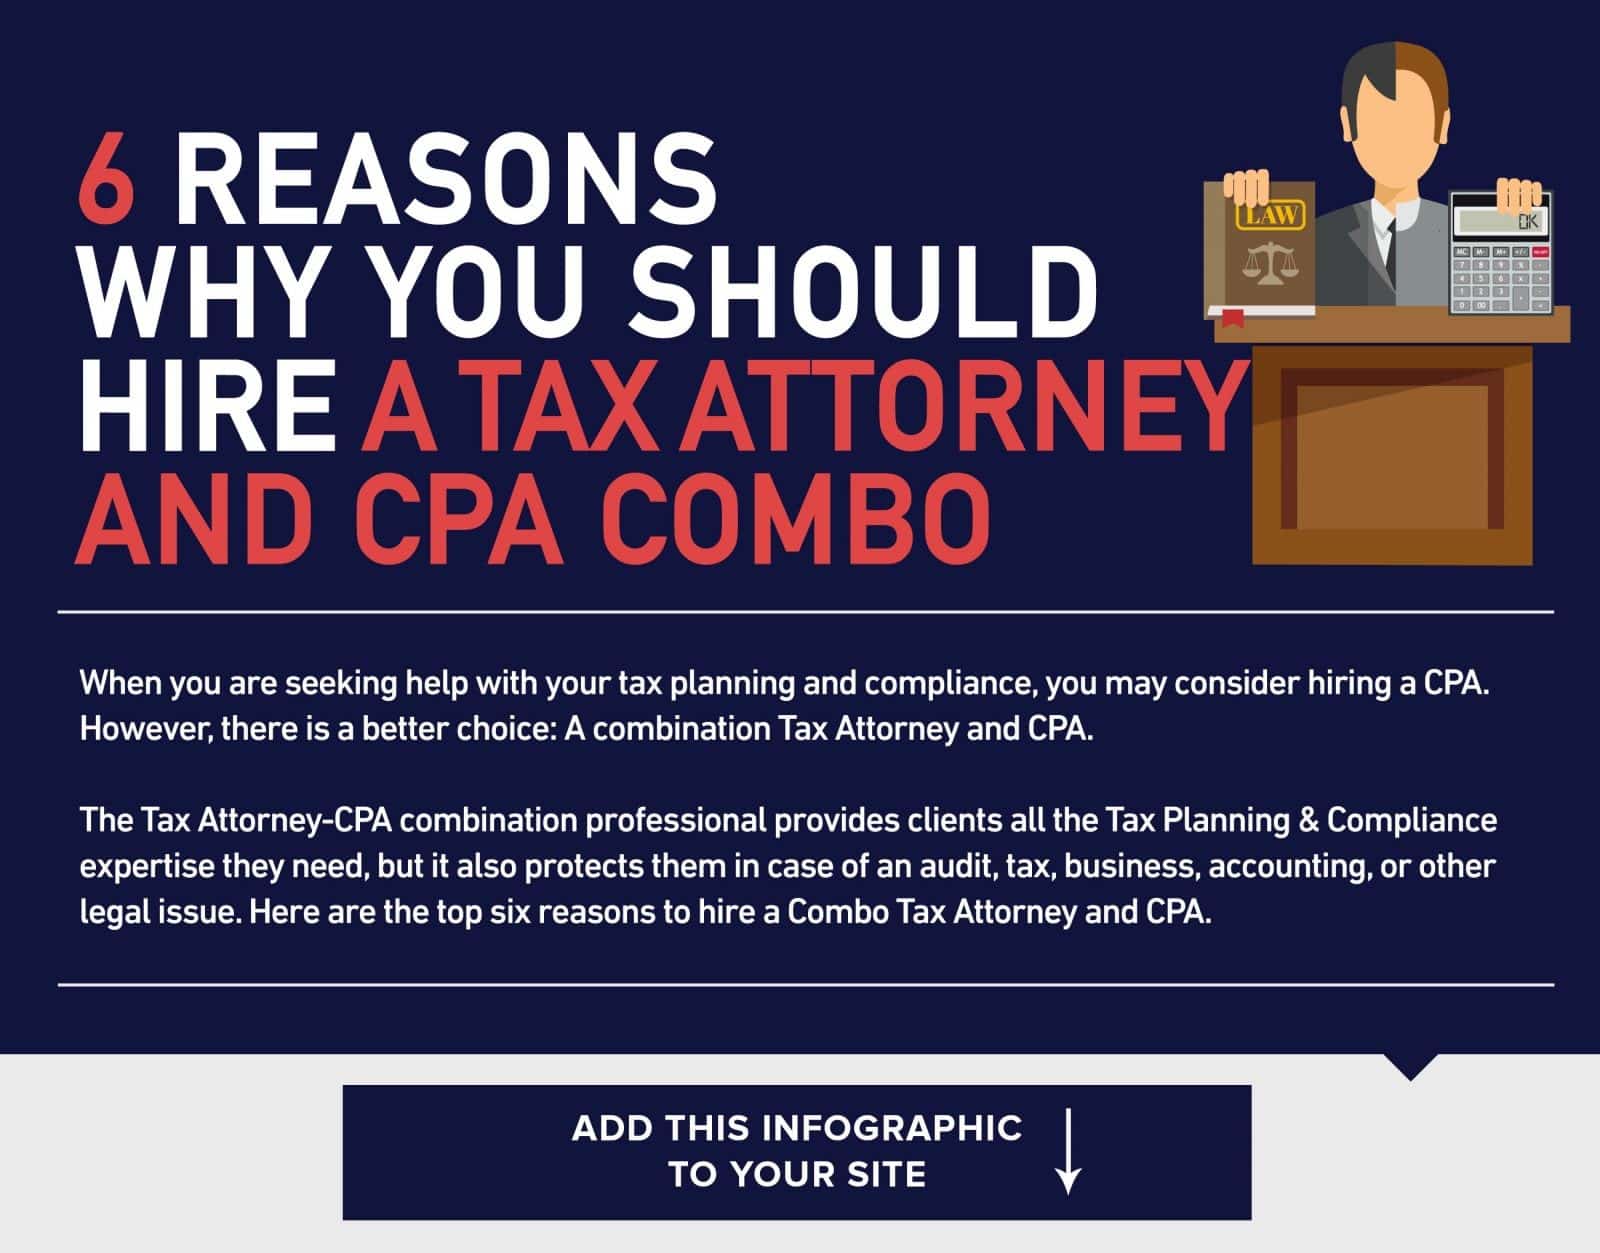 Why hire a dually certified tax attorney and CPA download